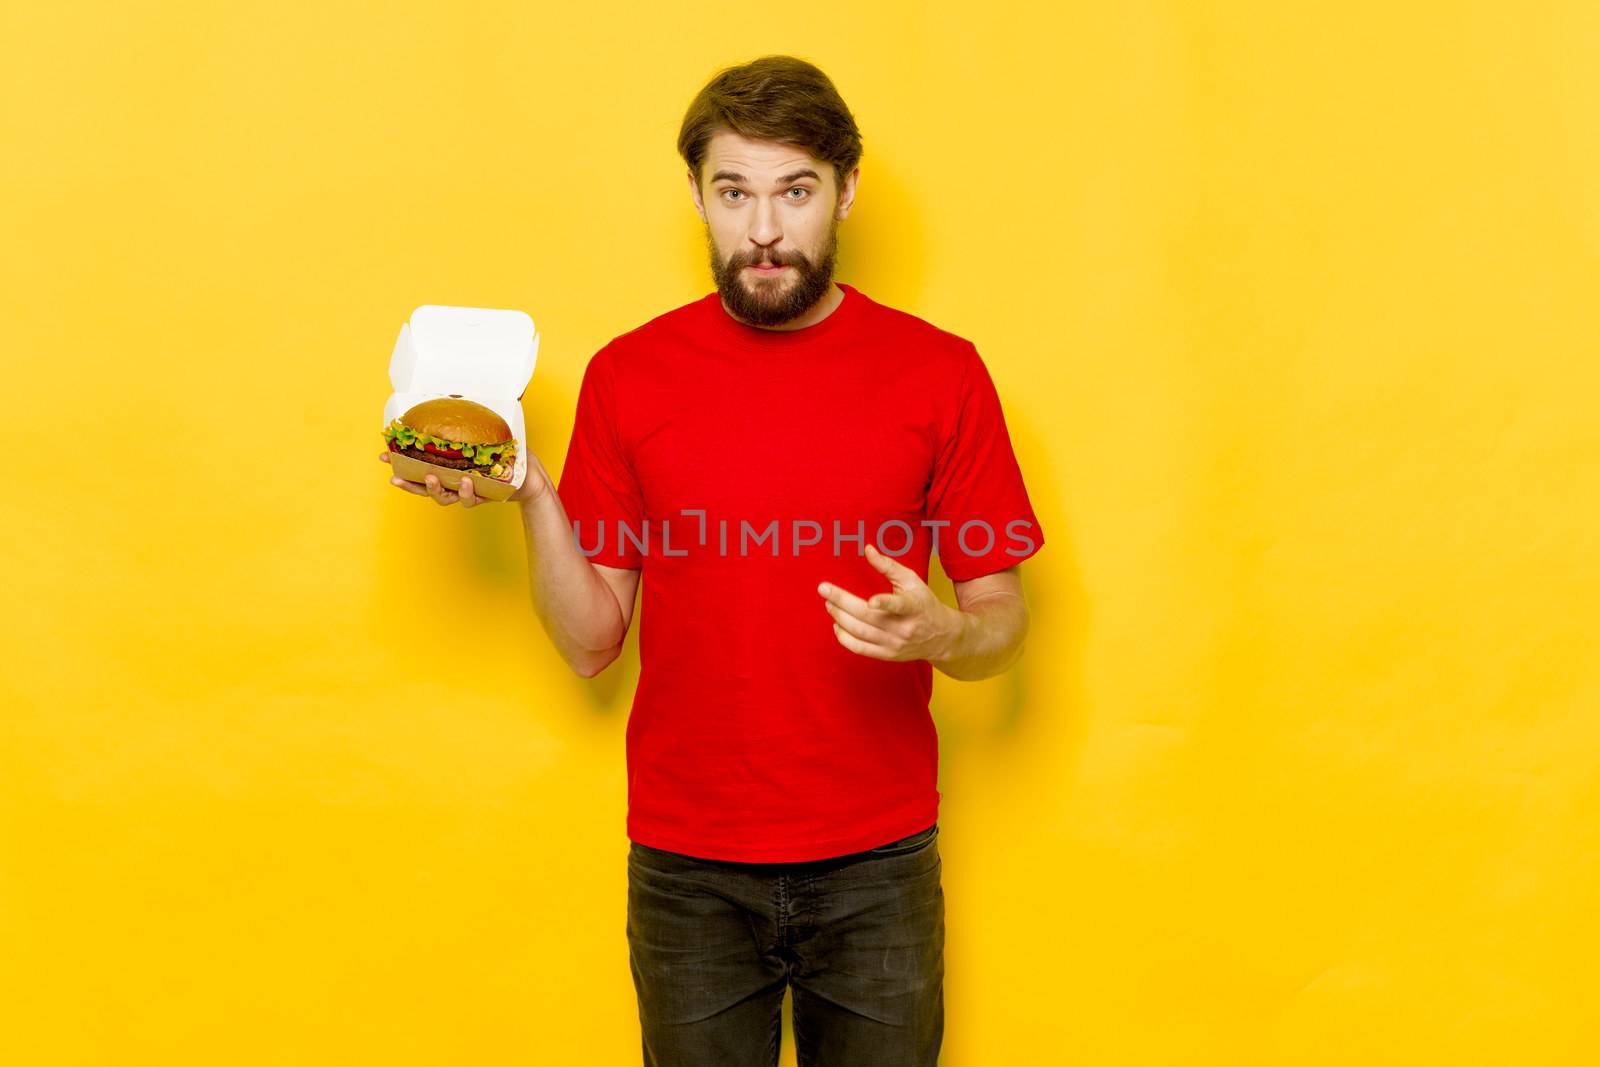 Hamburgers in a box and an emotional man in a red T-shirt on a yellow background